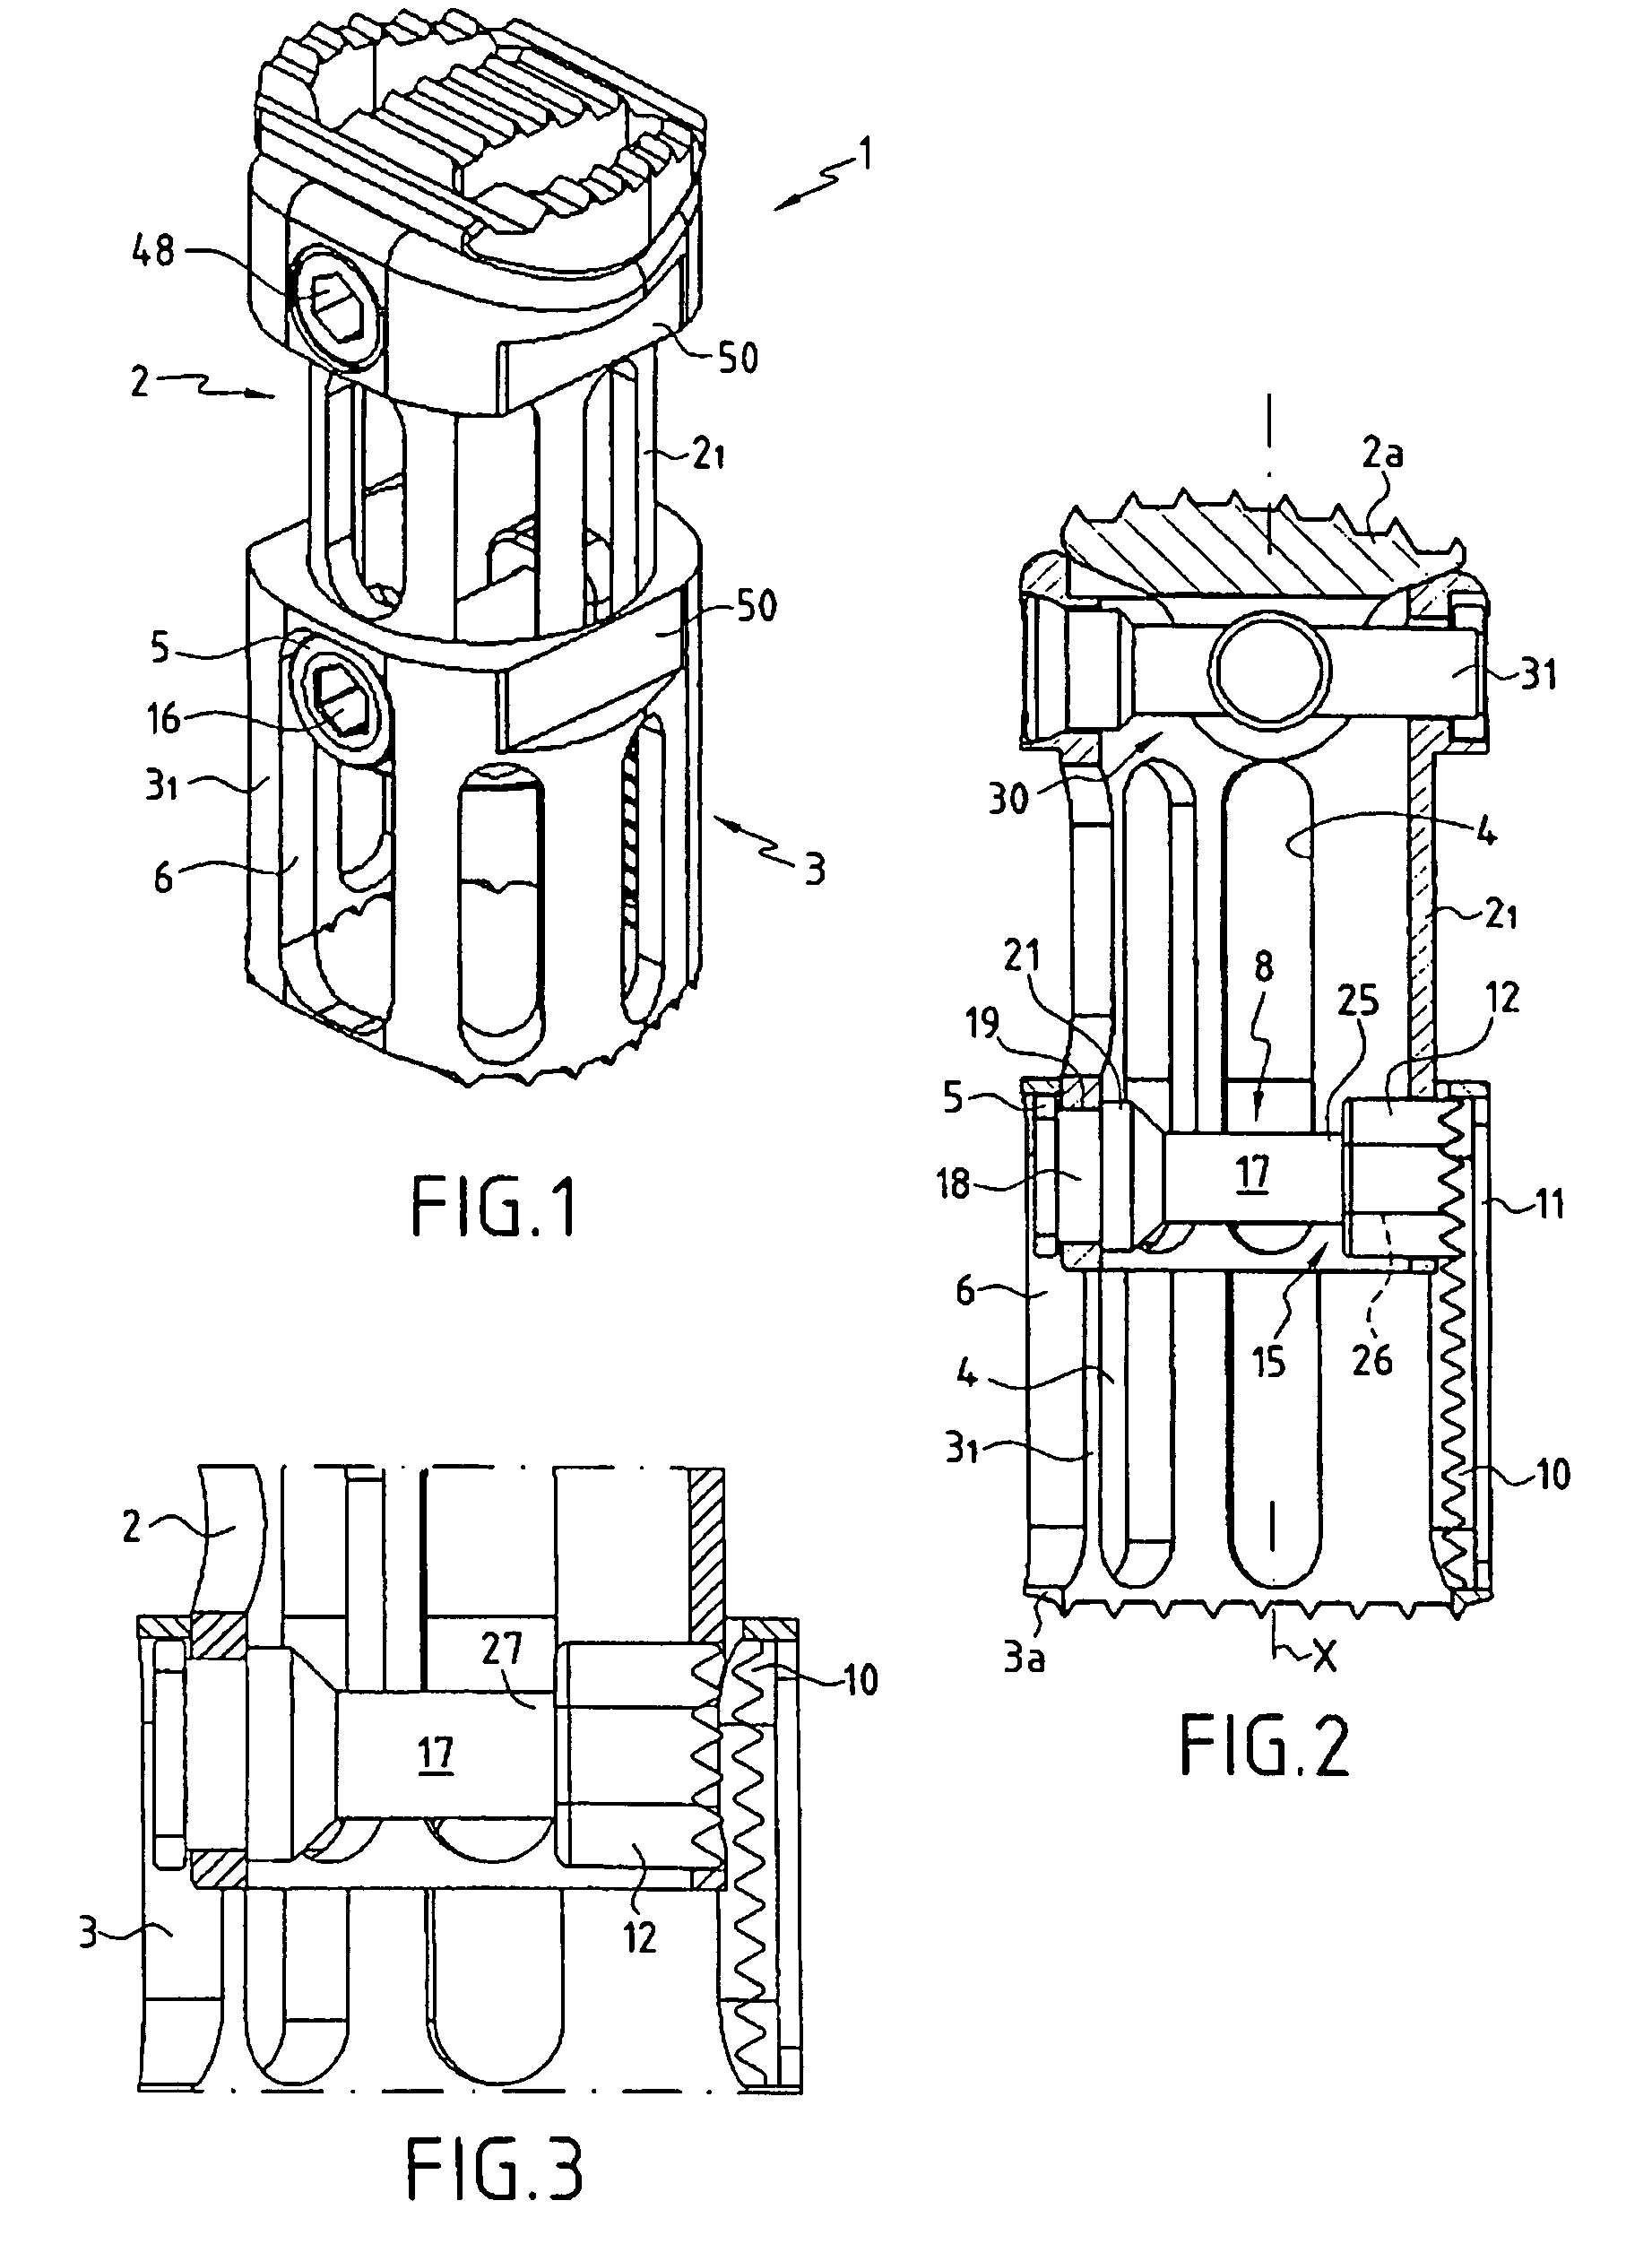 Vertebral replacement and distraction device for placing said implant